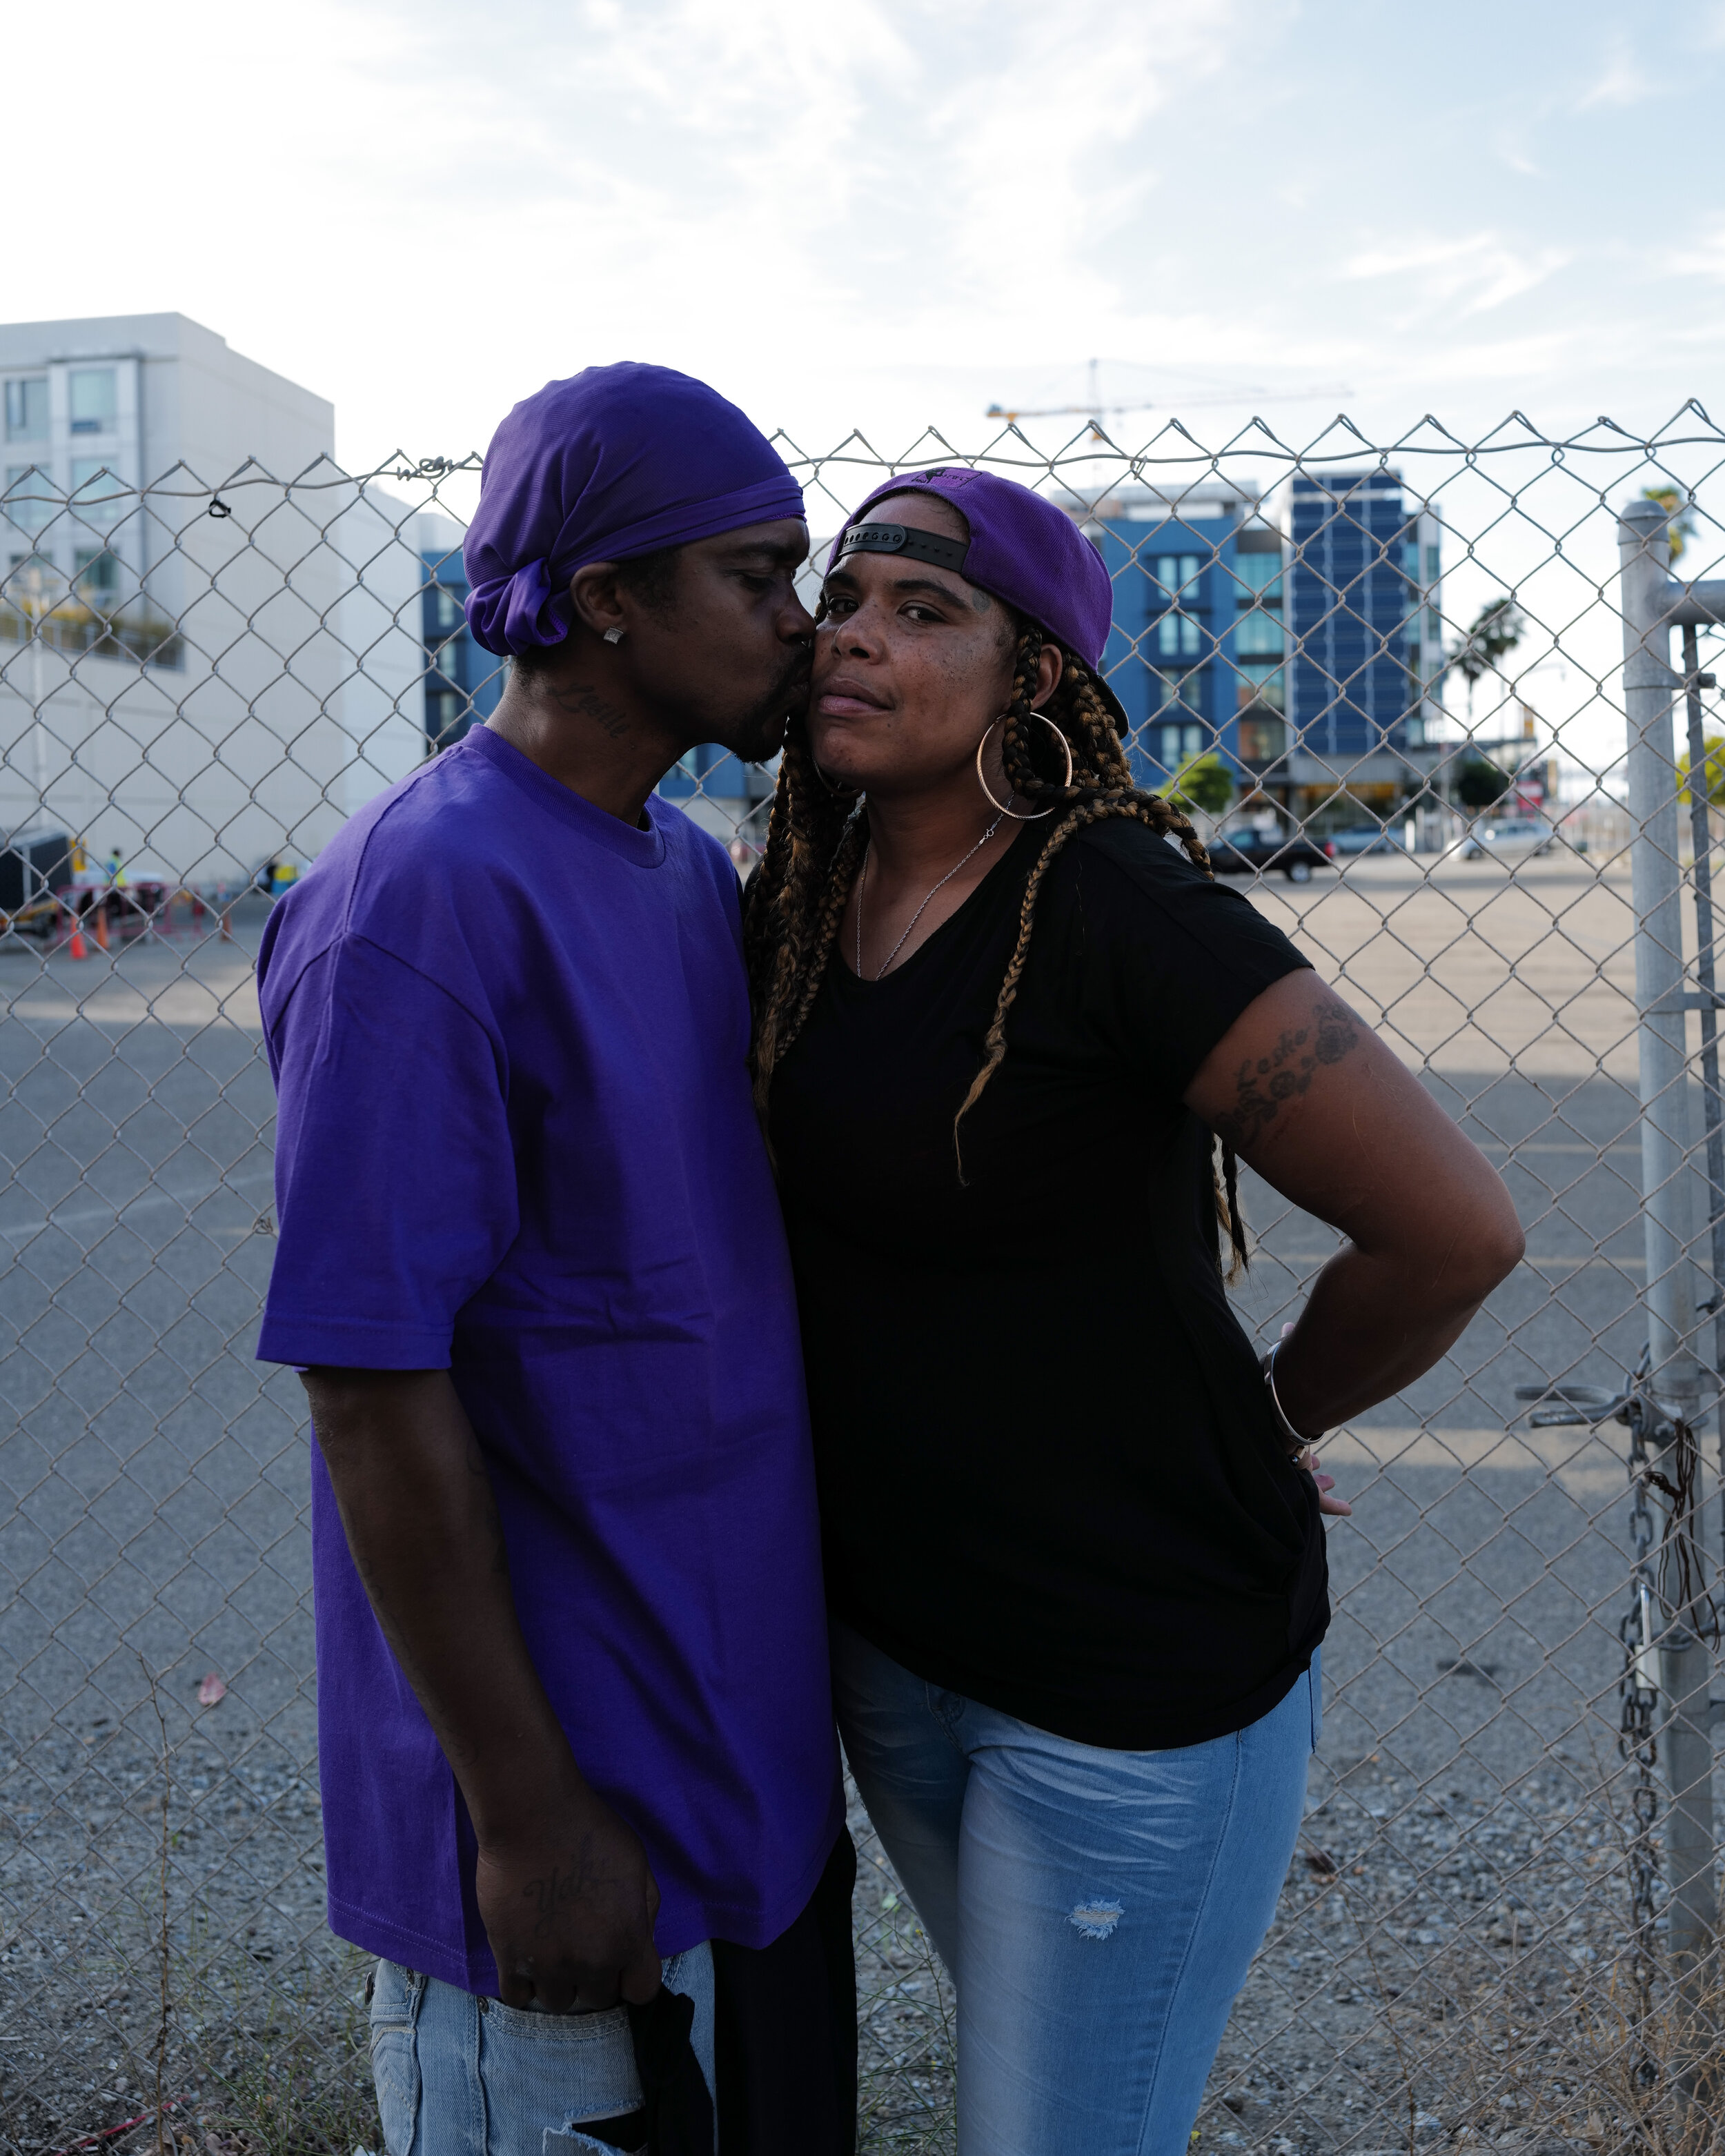  This project documents the protest movement against police brutality in the Greater Bay Area from June 2020 to present. This photo is of two organizers of a BLM rally in June 2020 in San Francisco.  